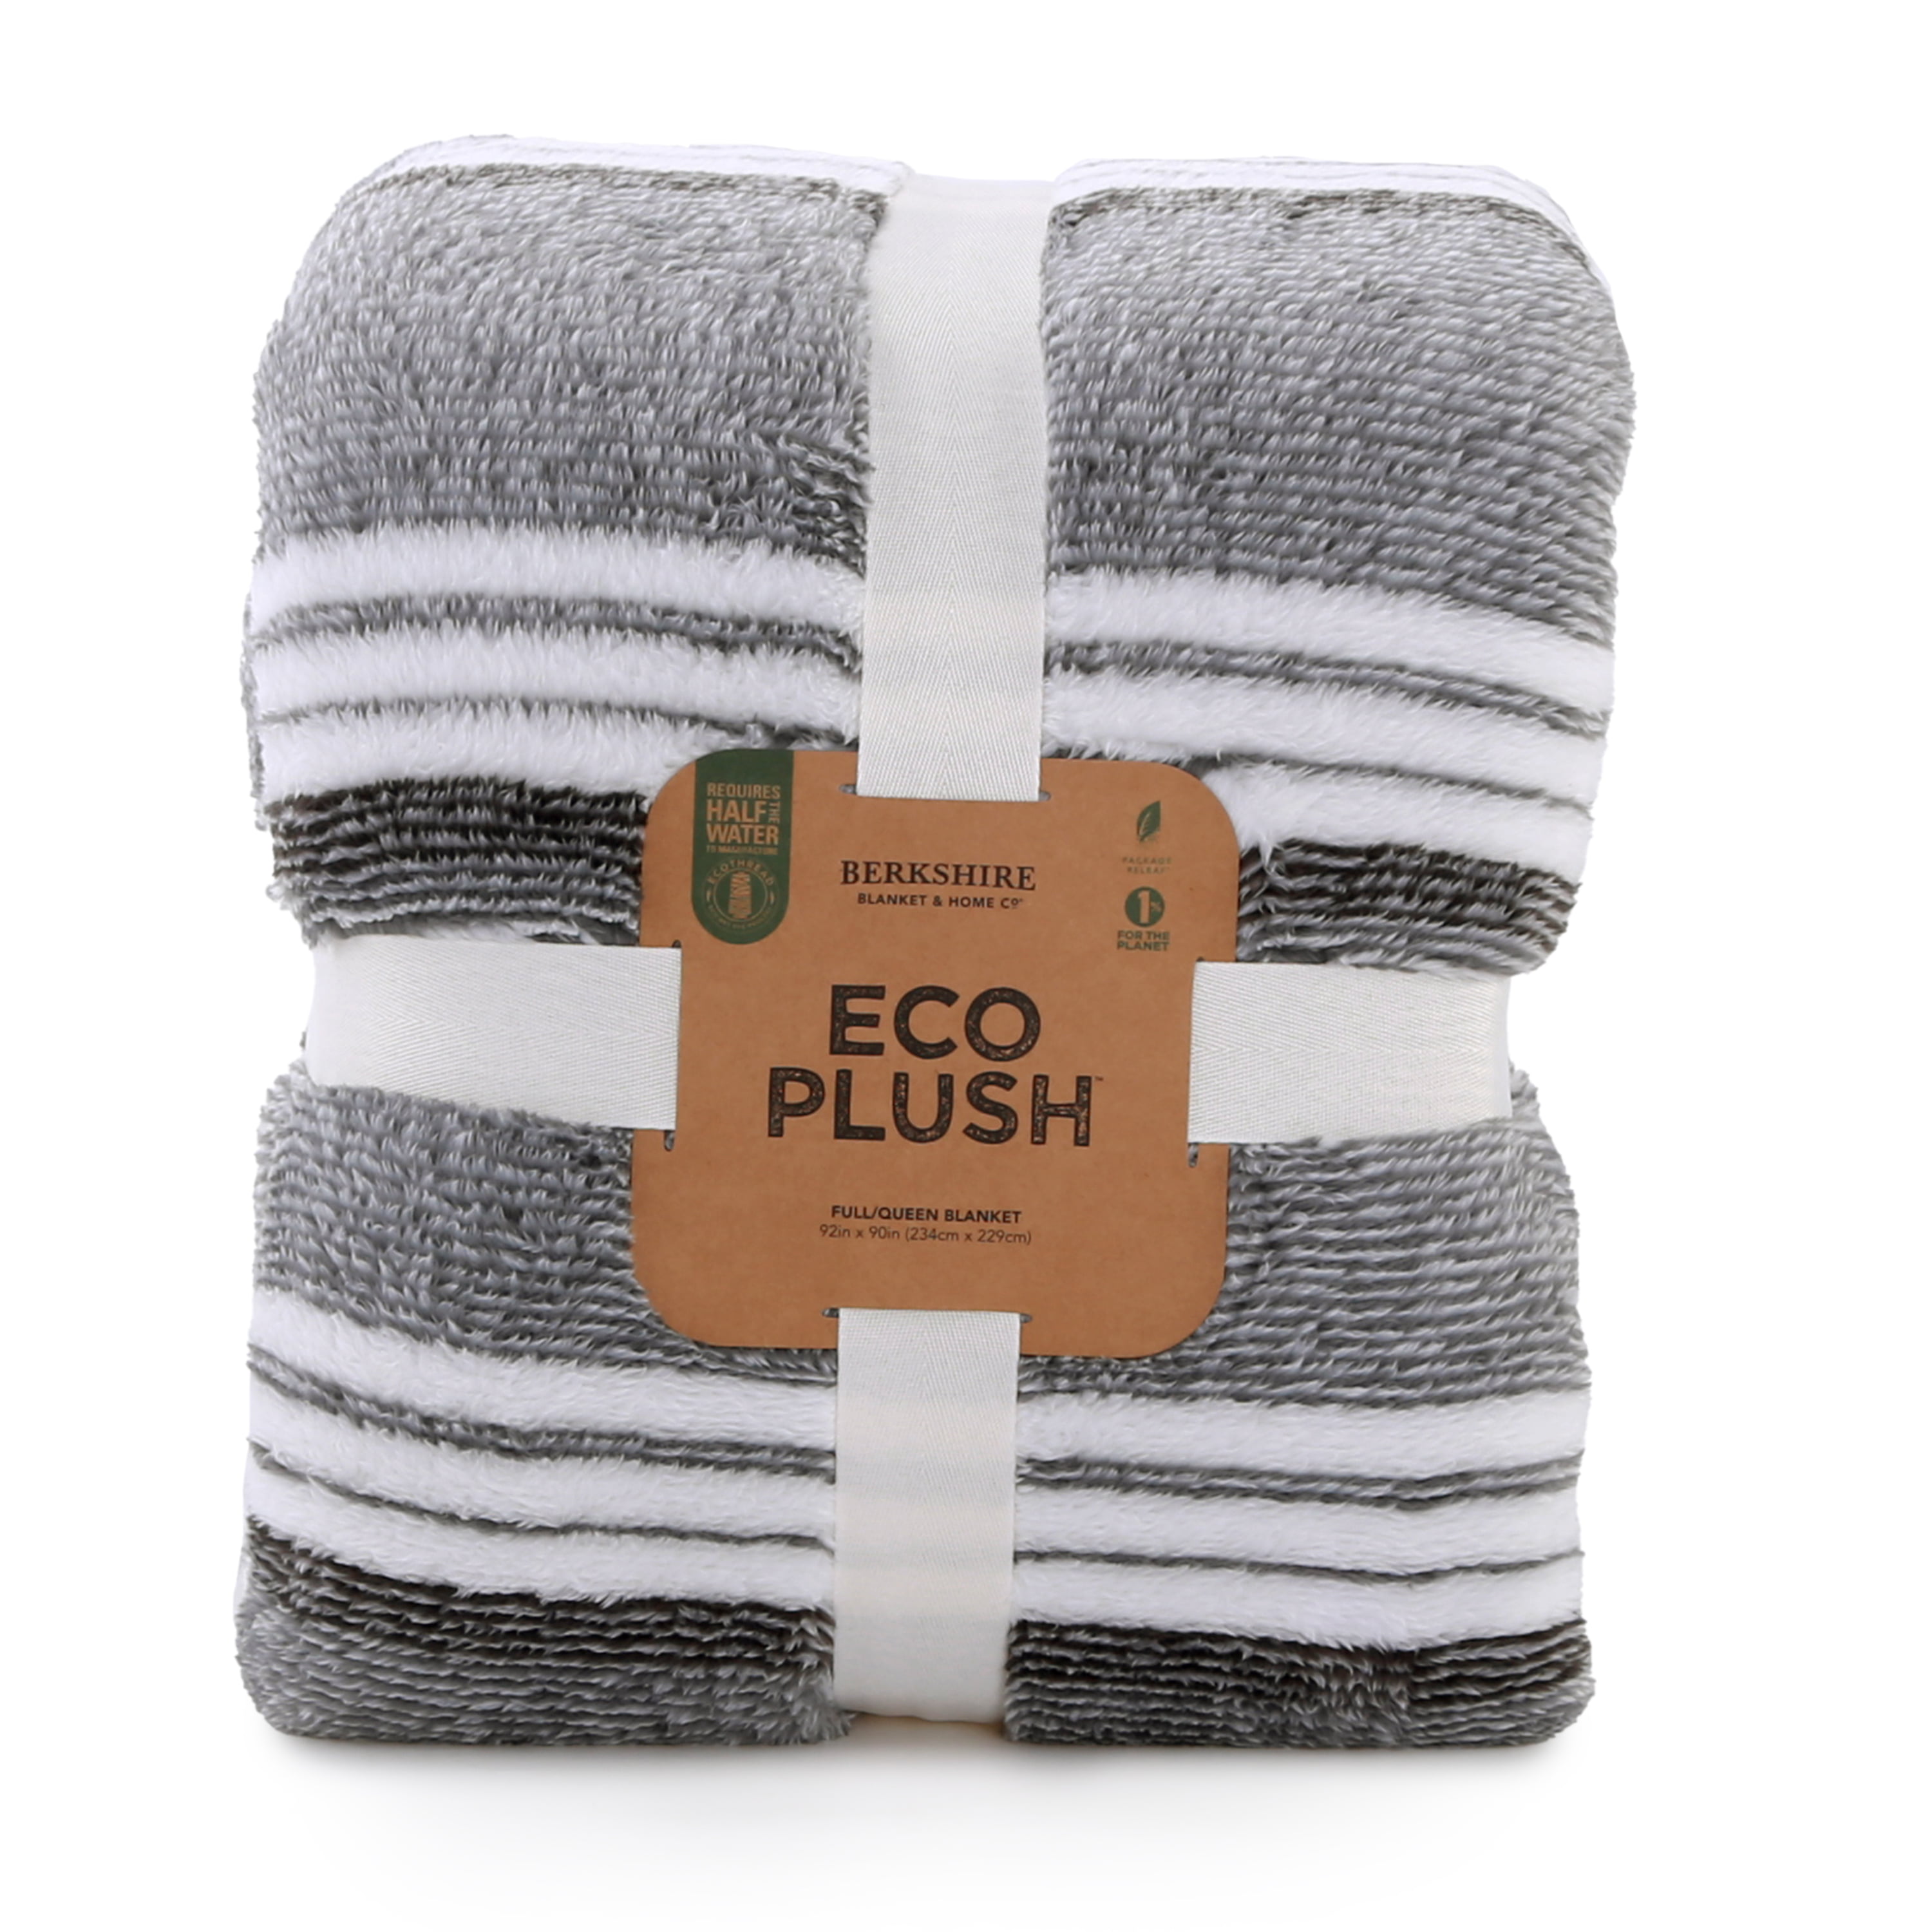 Berkshire Blanket Eco Plush Bed Blanket (Twin, Various Colors) $18.50 + Free S&H w/ Walmart+ or $35+